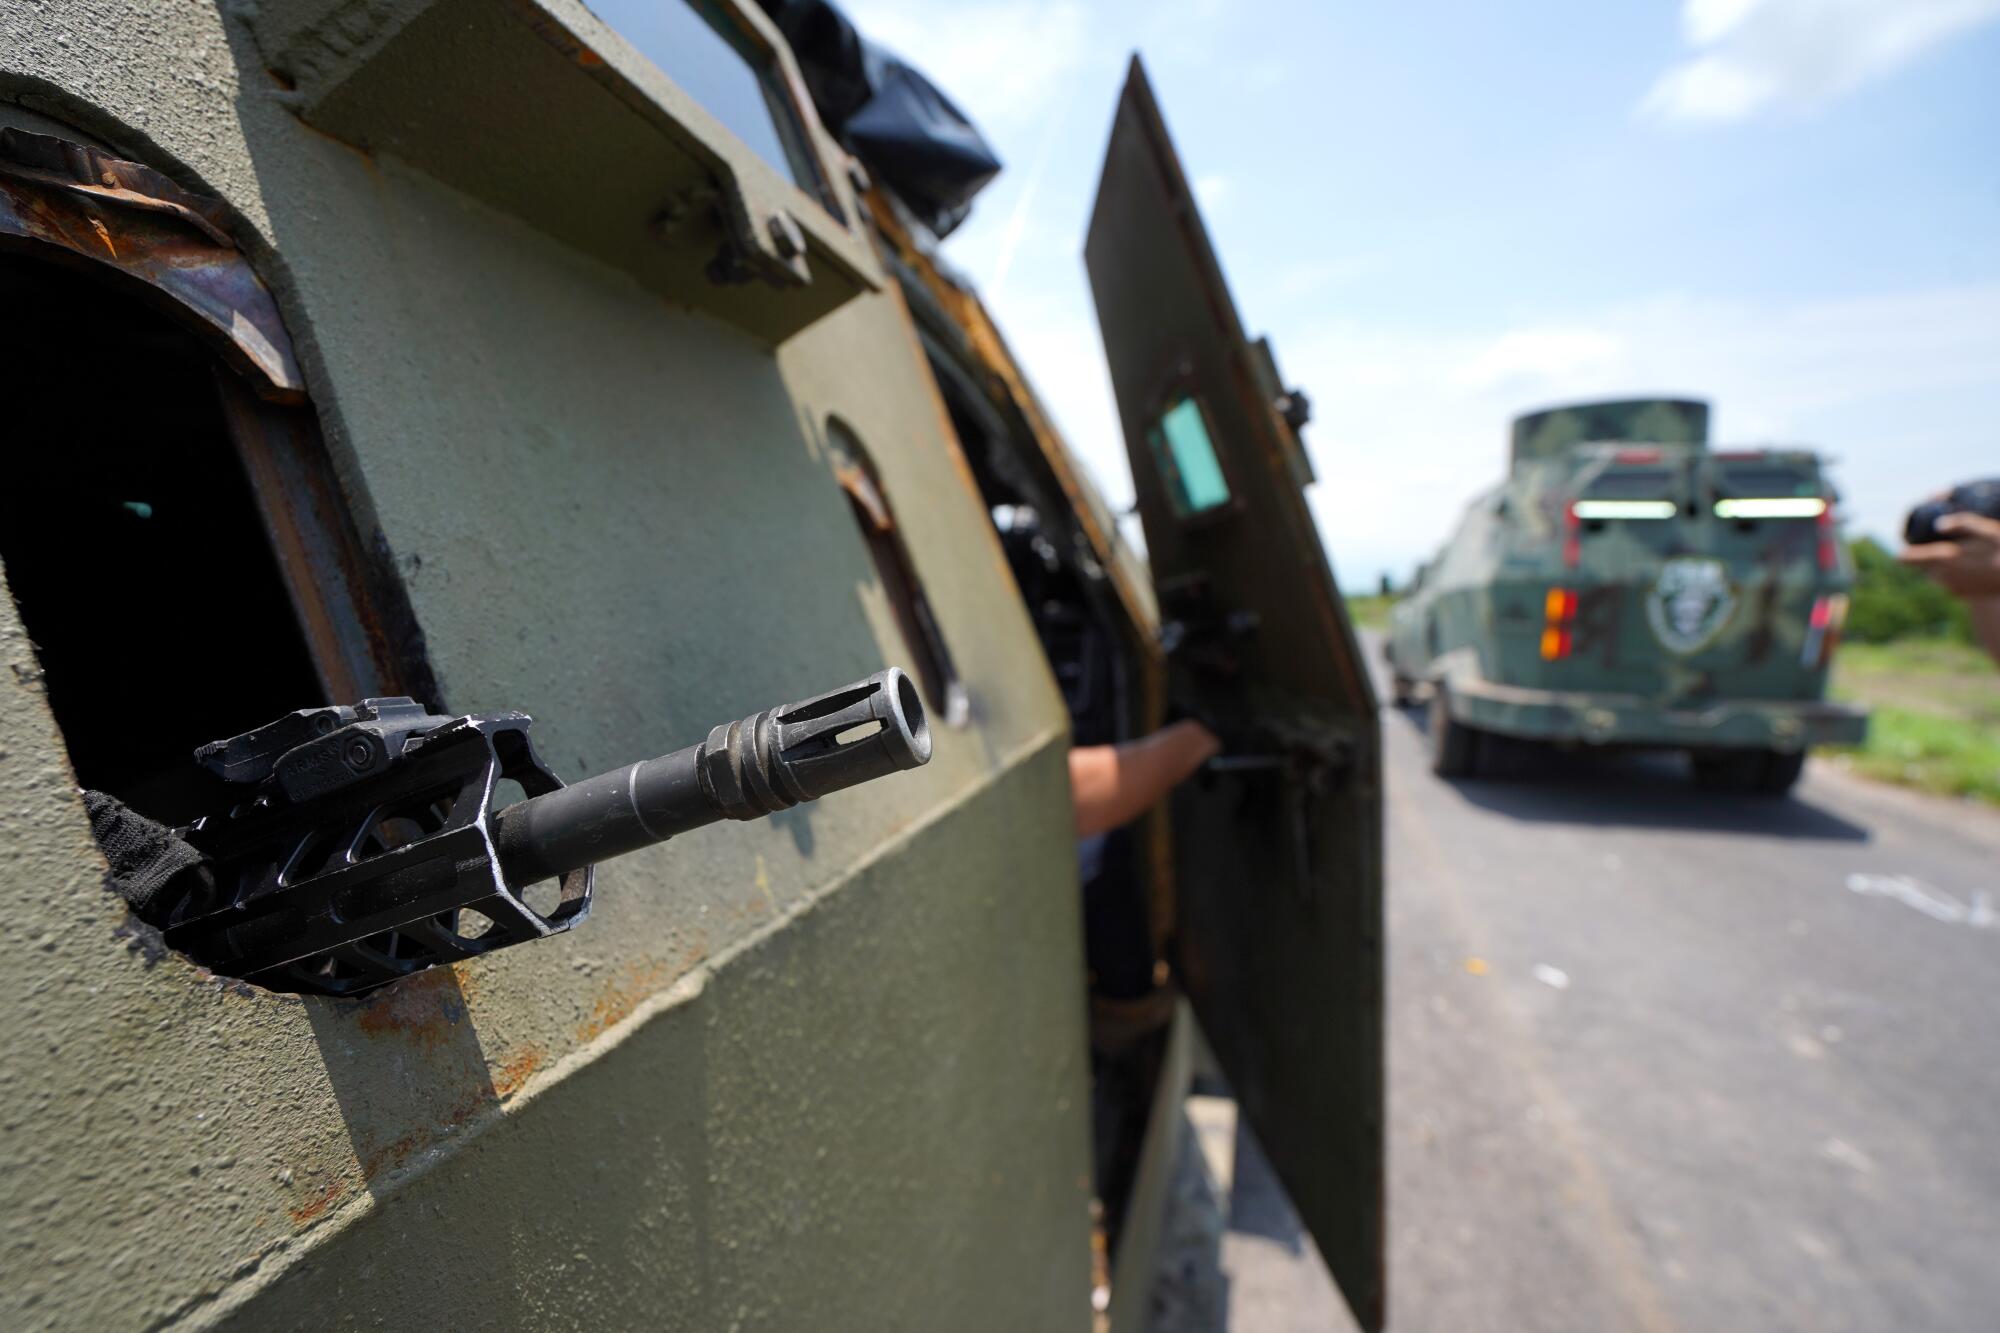 Close up of a vehicle with a rifle muzzle outside a window.